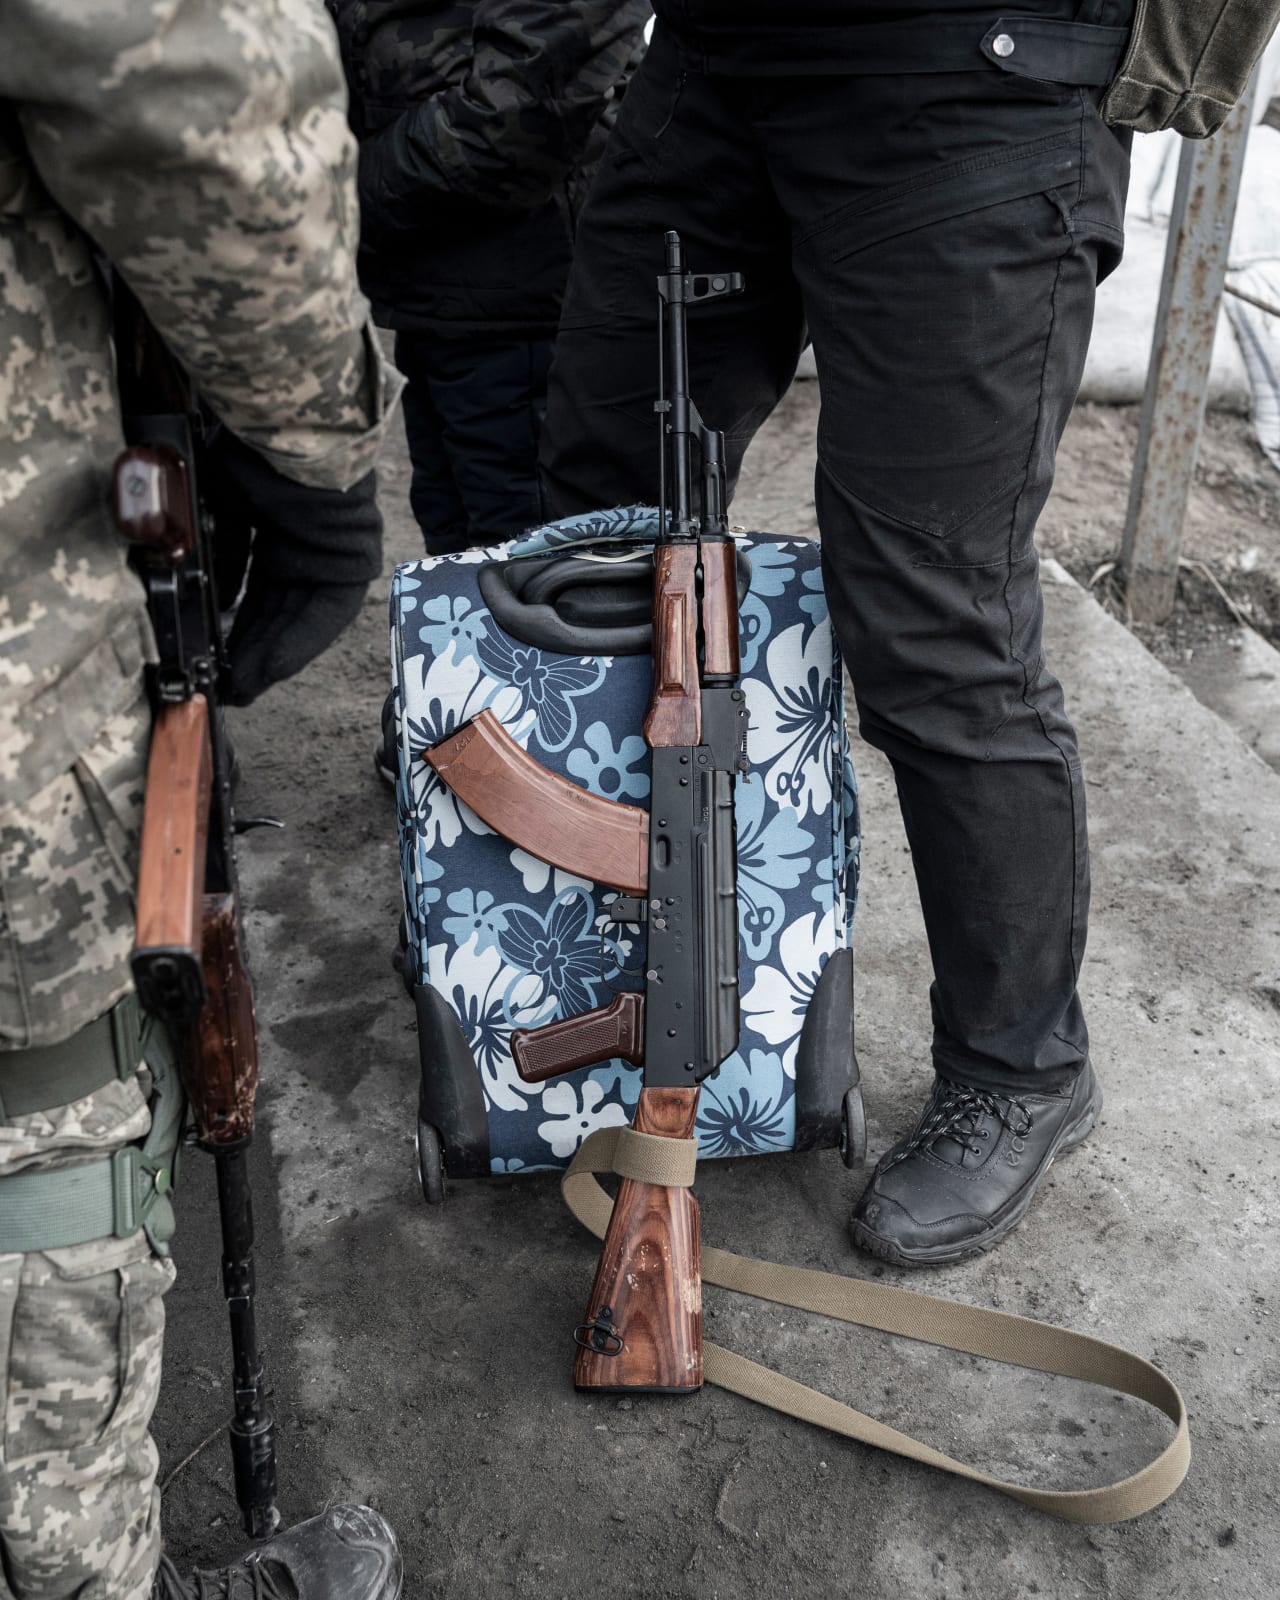 A gun leaning against a bright suitcase, left and right the legs of soldiers. 